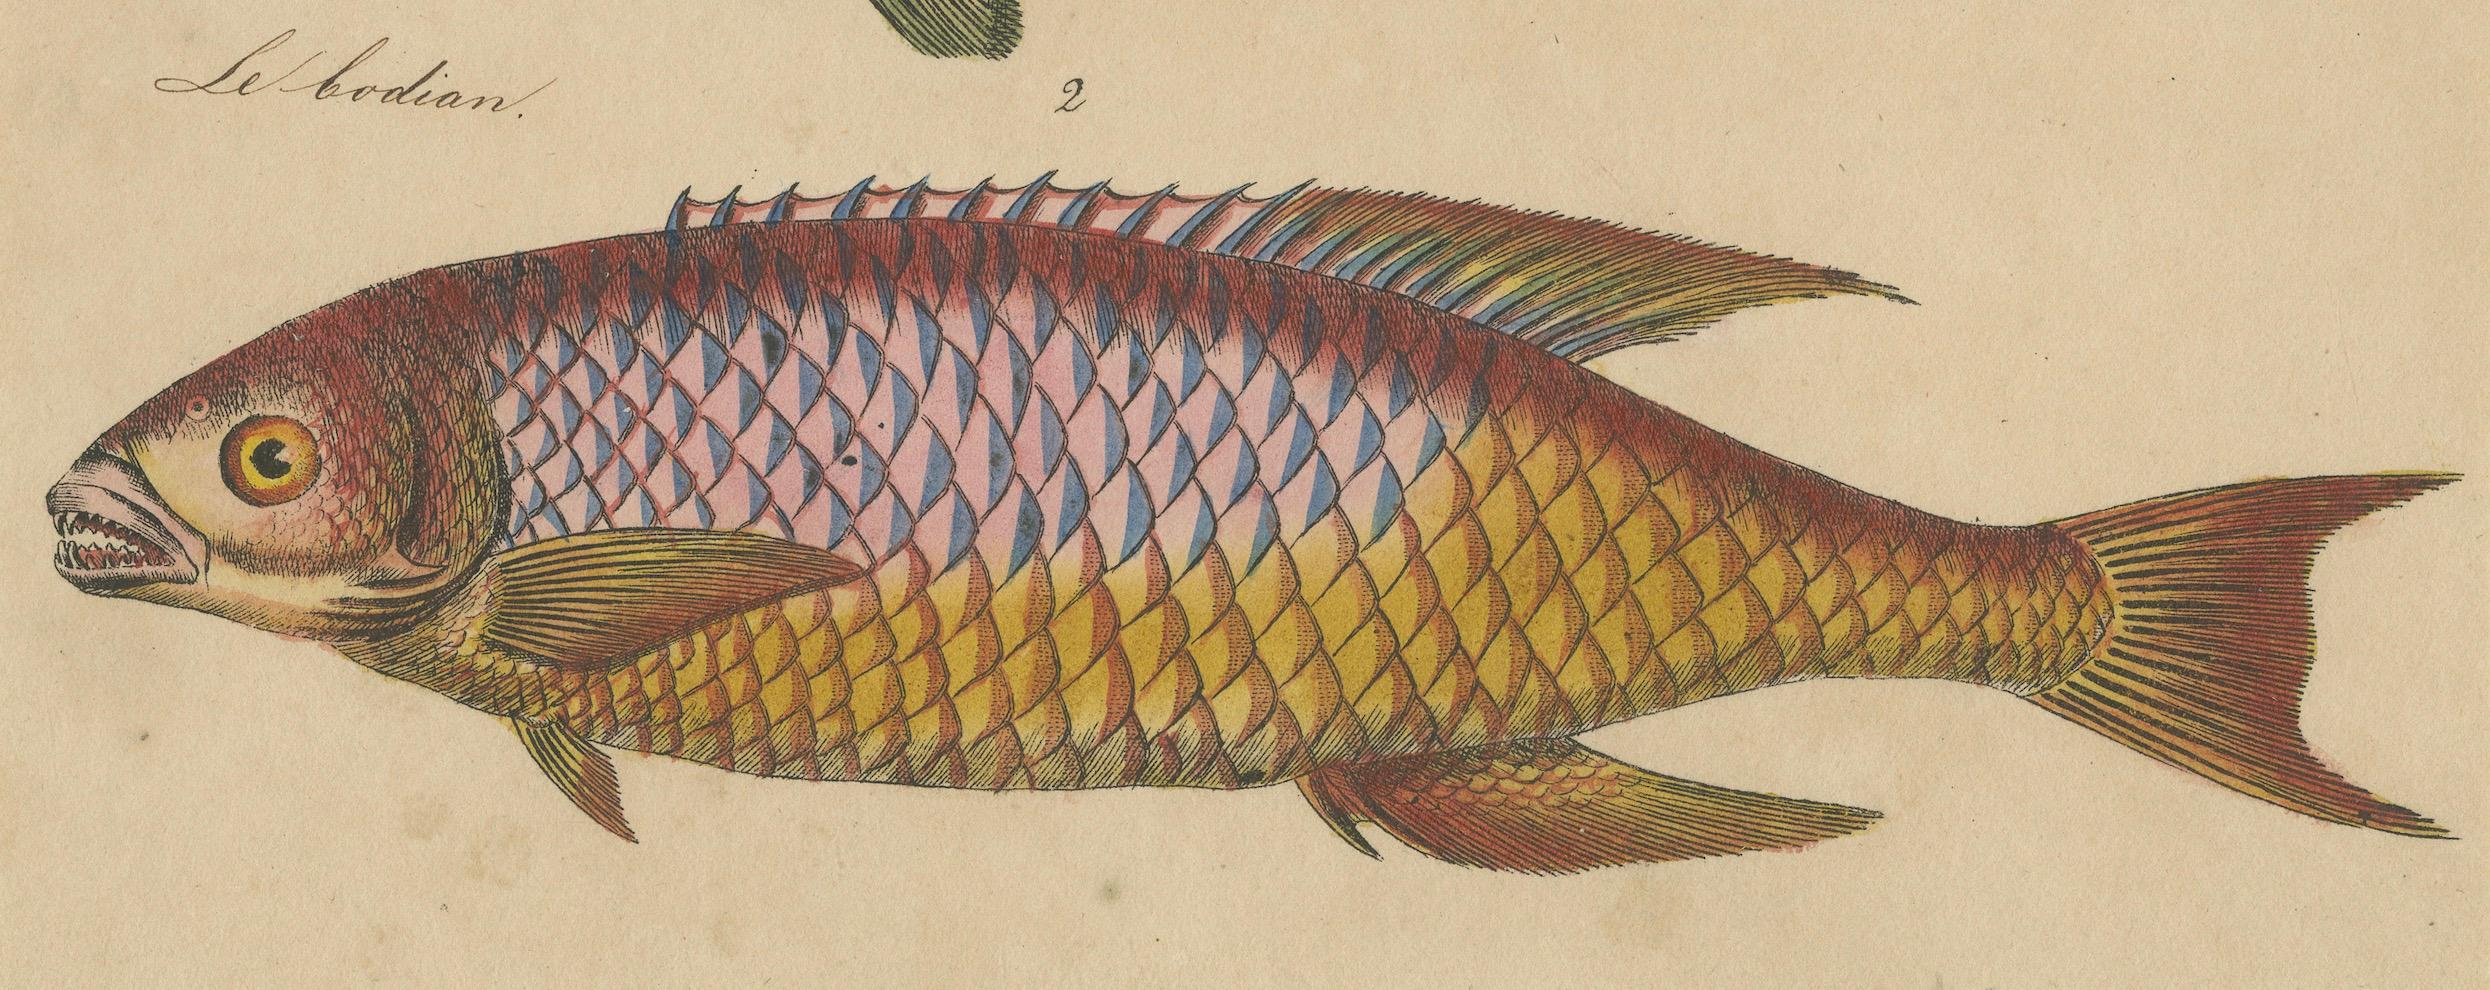 Early 19th Century 1819 Marine Splendor: Original Hand-Colored Engravings of Fishes For Sale